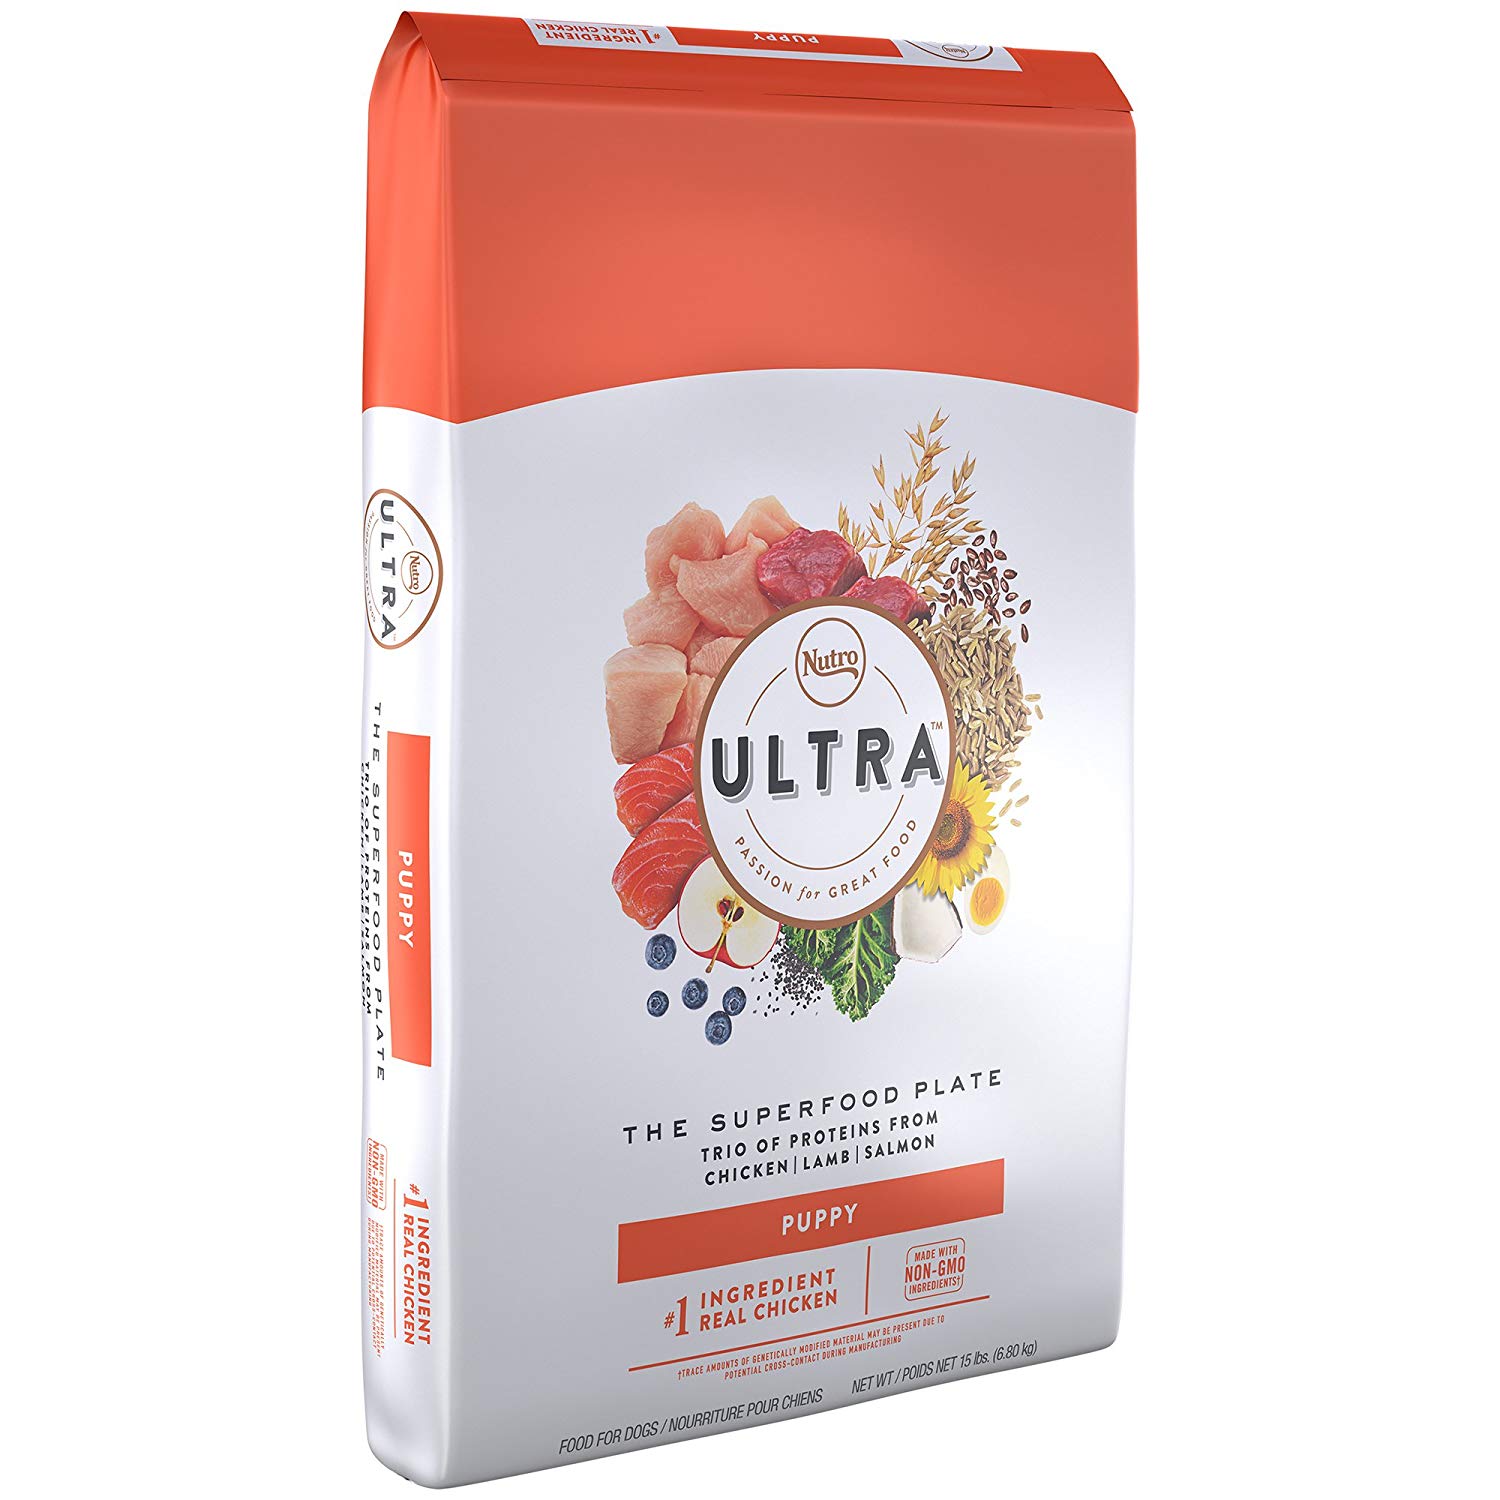 nutro-ultra-puppy-food-reviews-in-2020-ultimate-guide